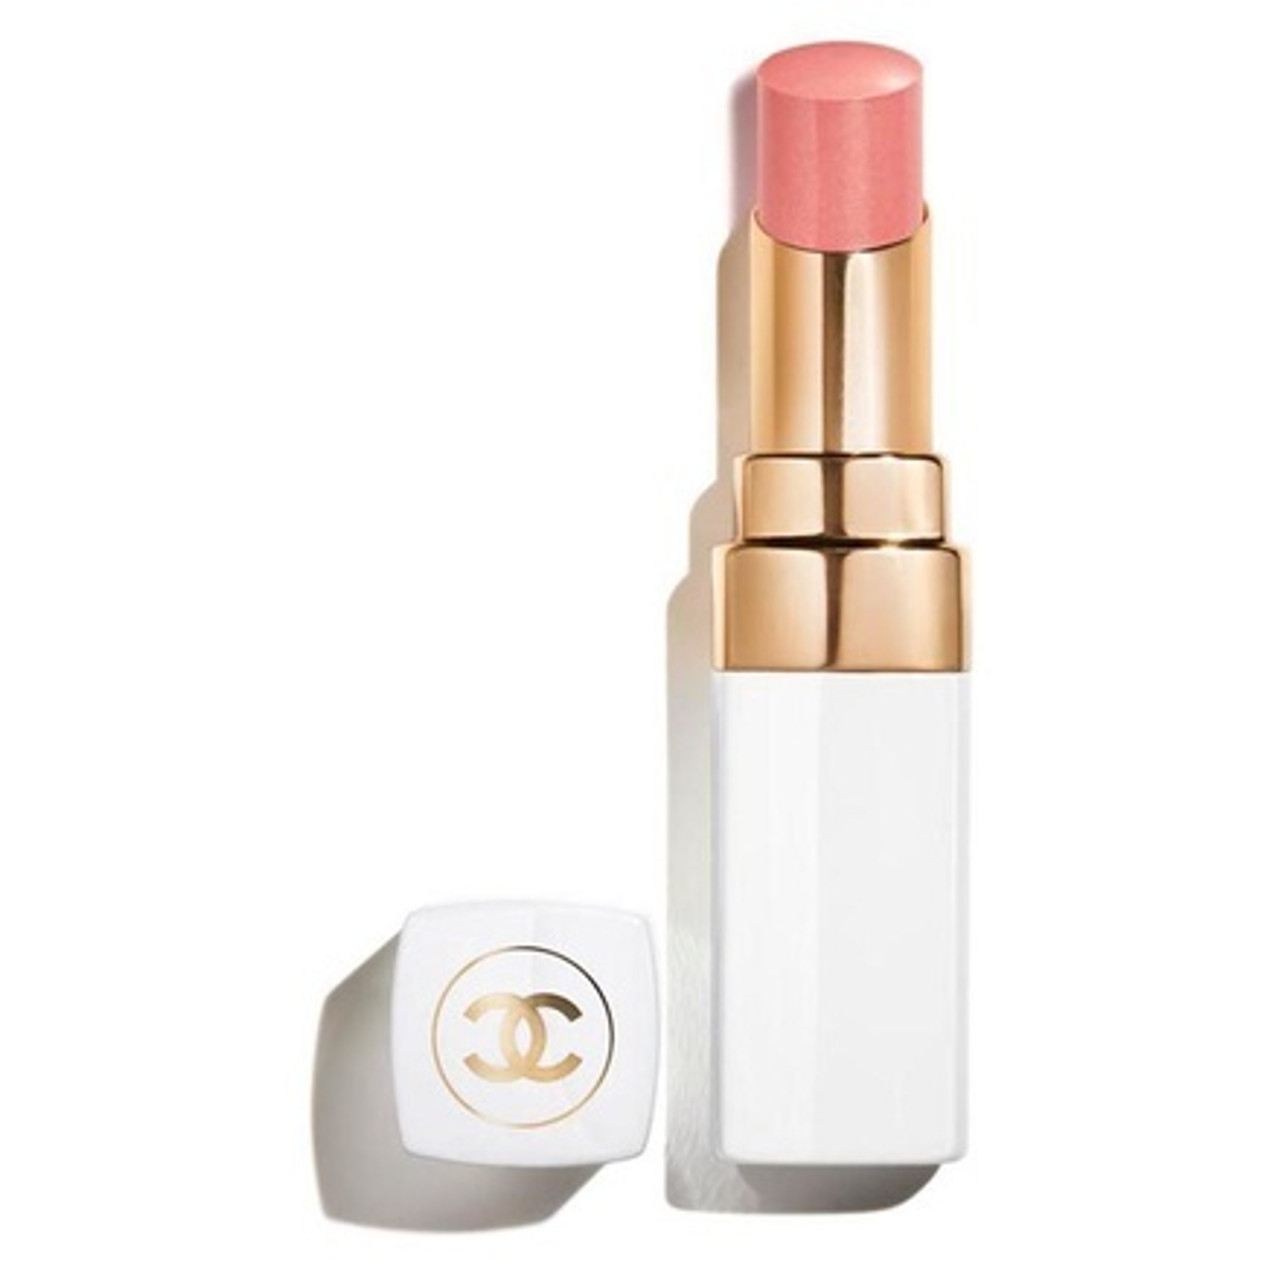 CHANEL Rouge Coco Baume ~ 928 Pink Delight - www.BonBonCosmetics.com